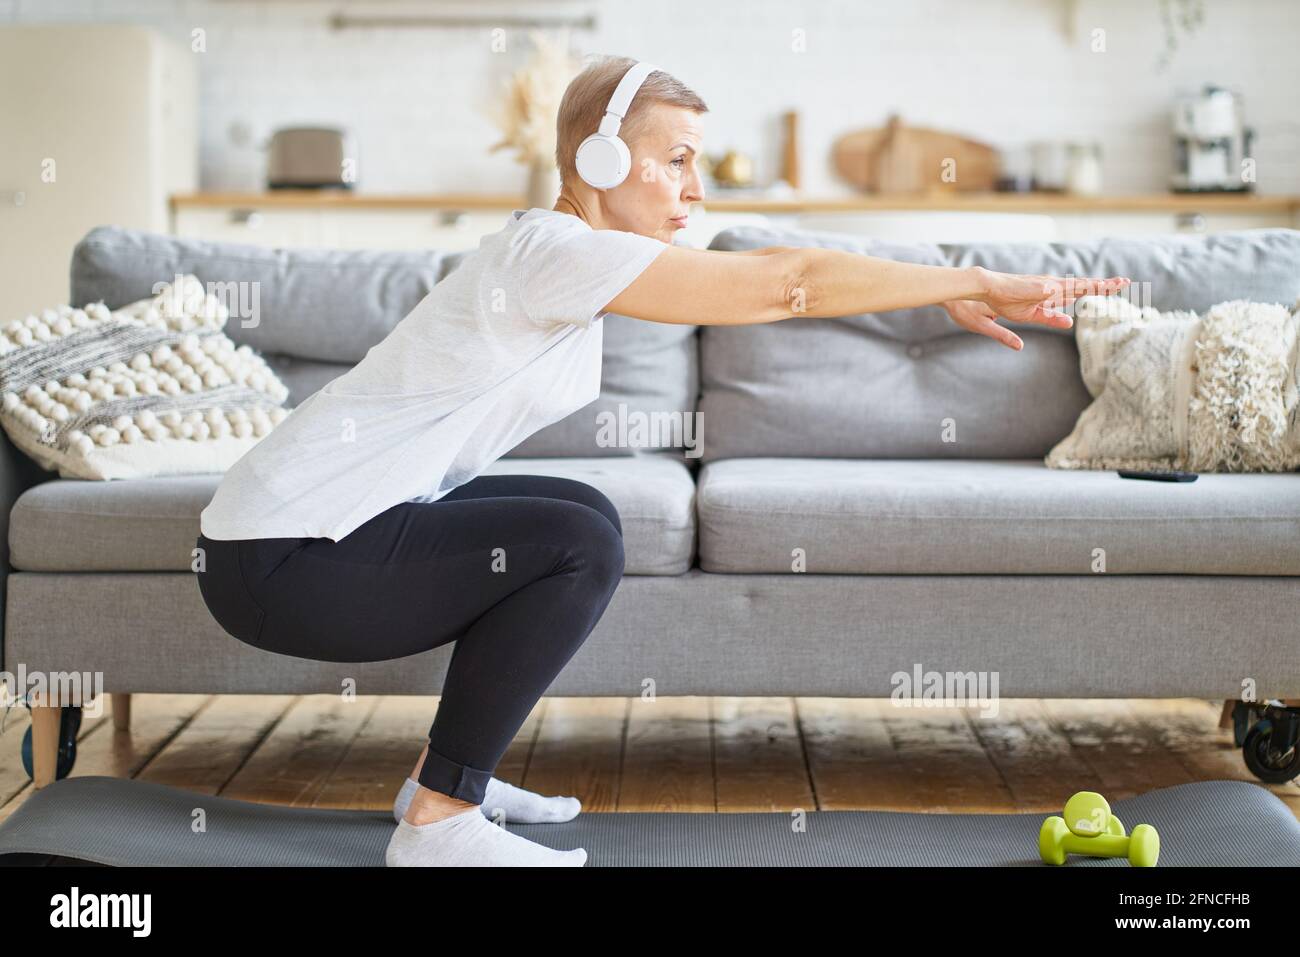 Senior woman stretching, online training in living room. Balancing yoga exercise. Exercising for emotional and spiritual health. Well-being, wellness for retired female. Domestic yoga practice Stock Photo